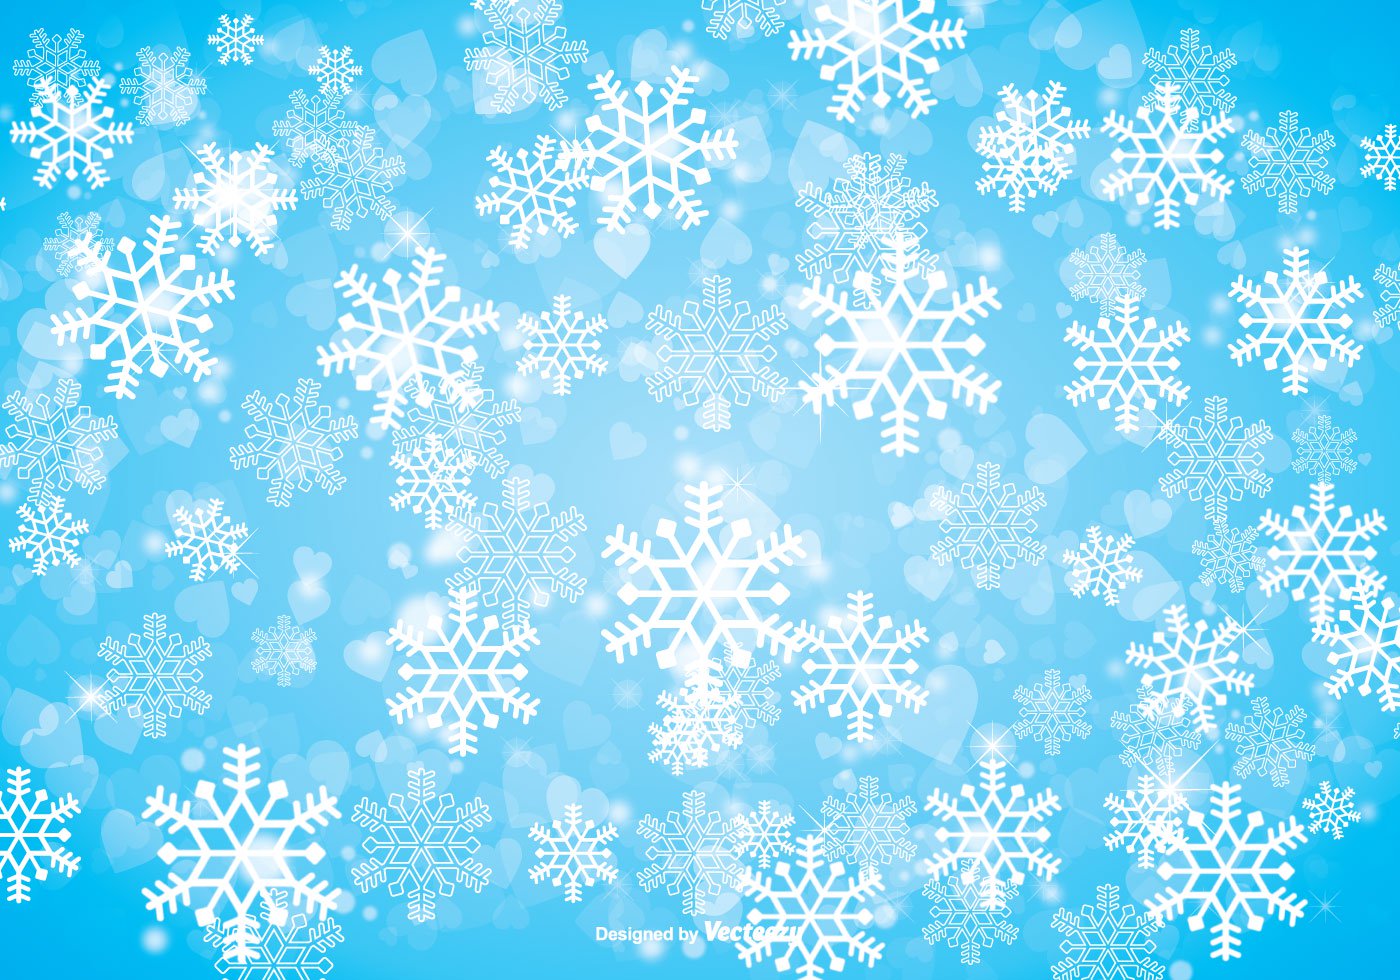 Winter Snowflake Background   Download Free Vector Art